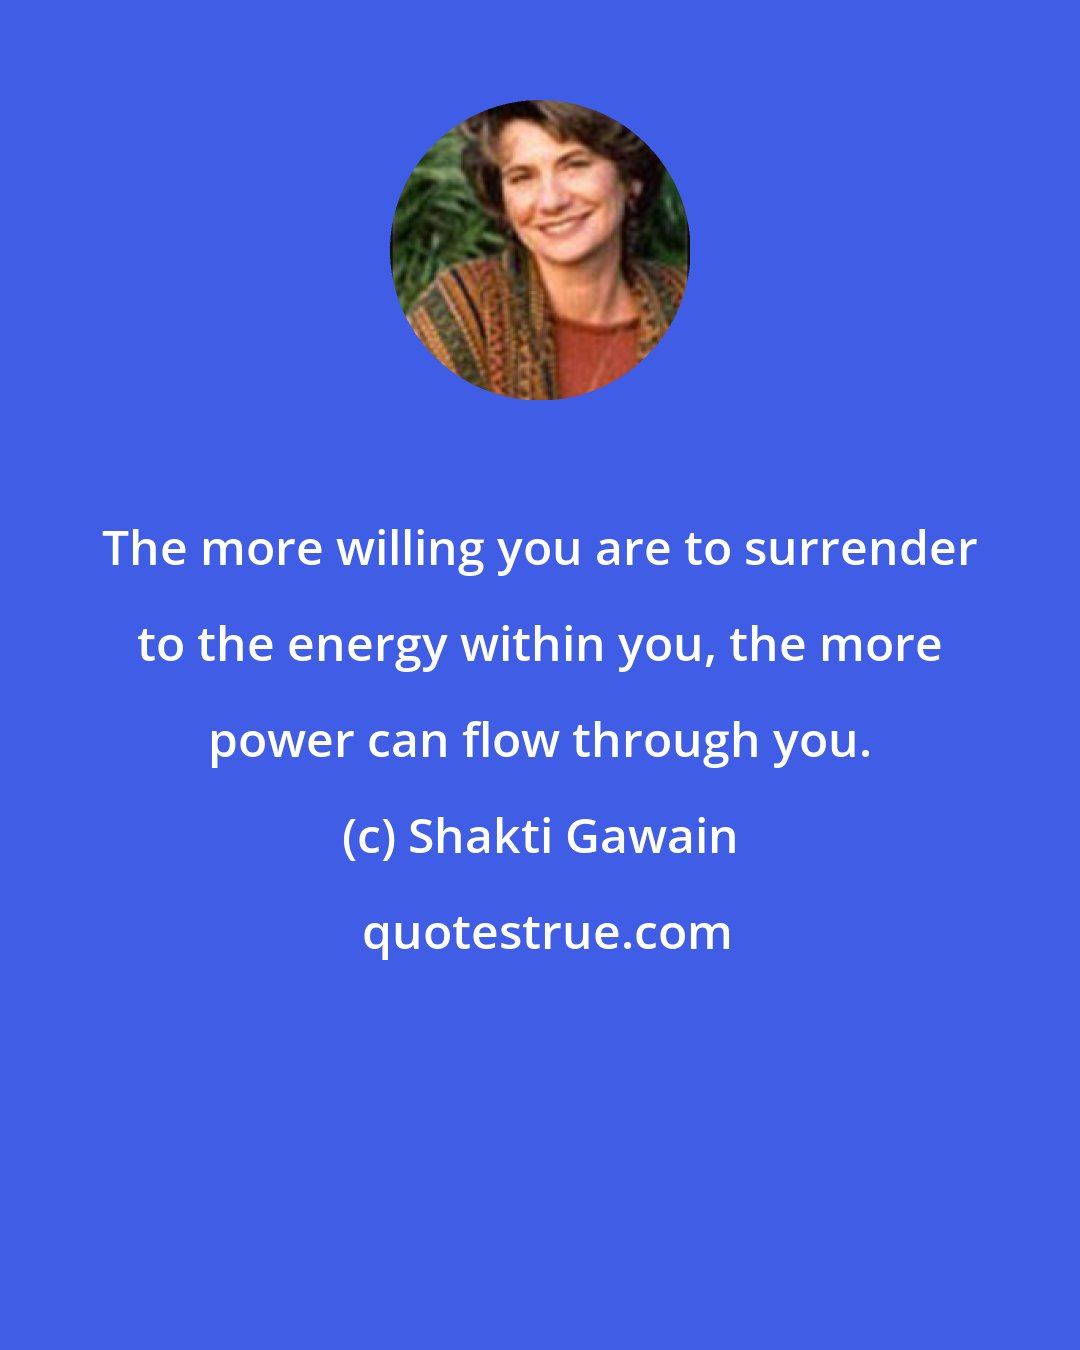 Shakti Gawain: The more willing you are to surrender to the energy within you, the more power can flow through you.